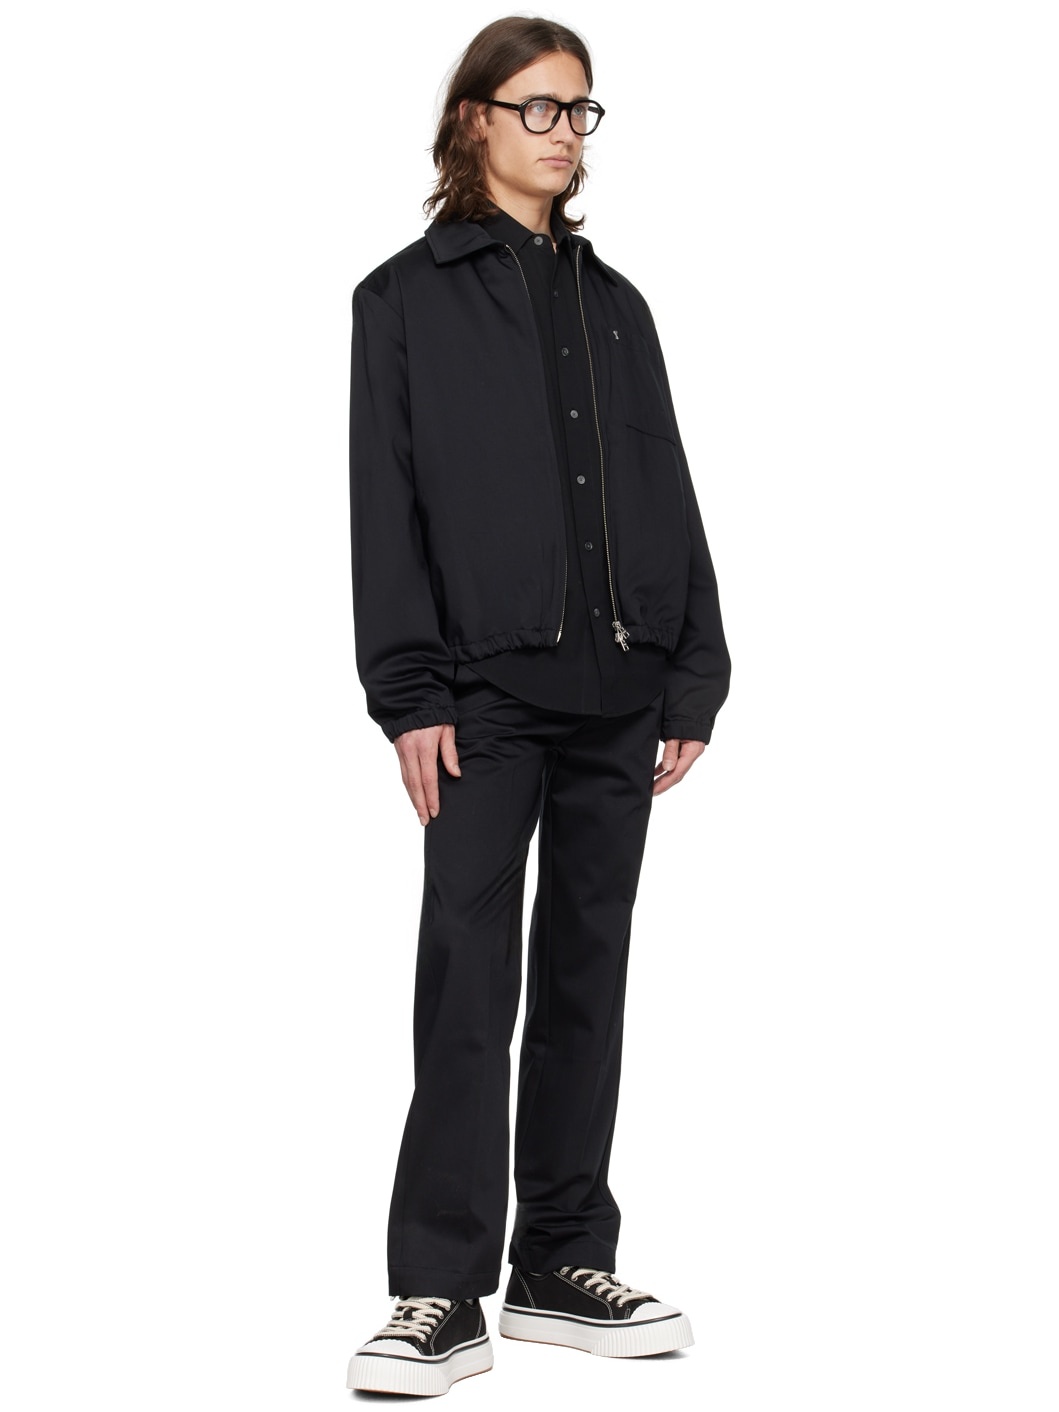 Black Button-Fly Trousers - 4